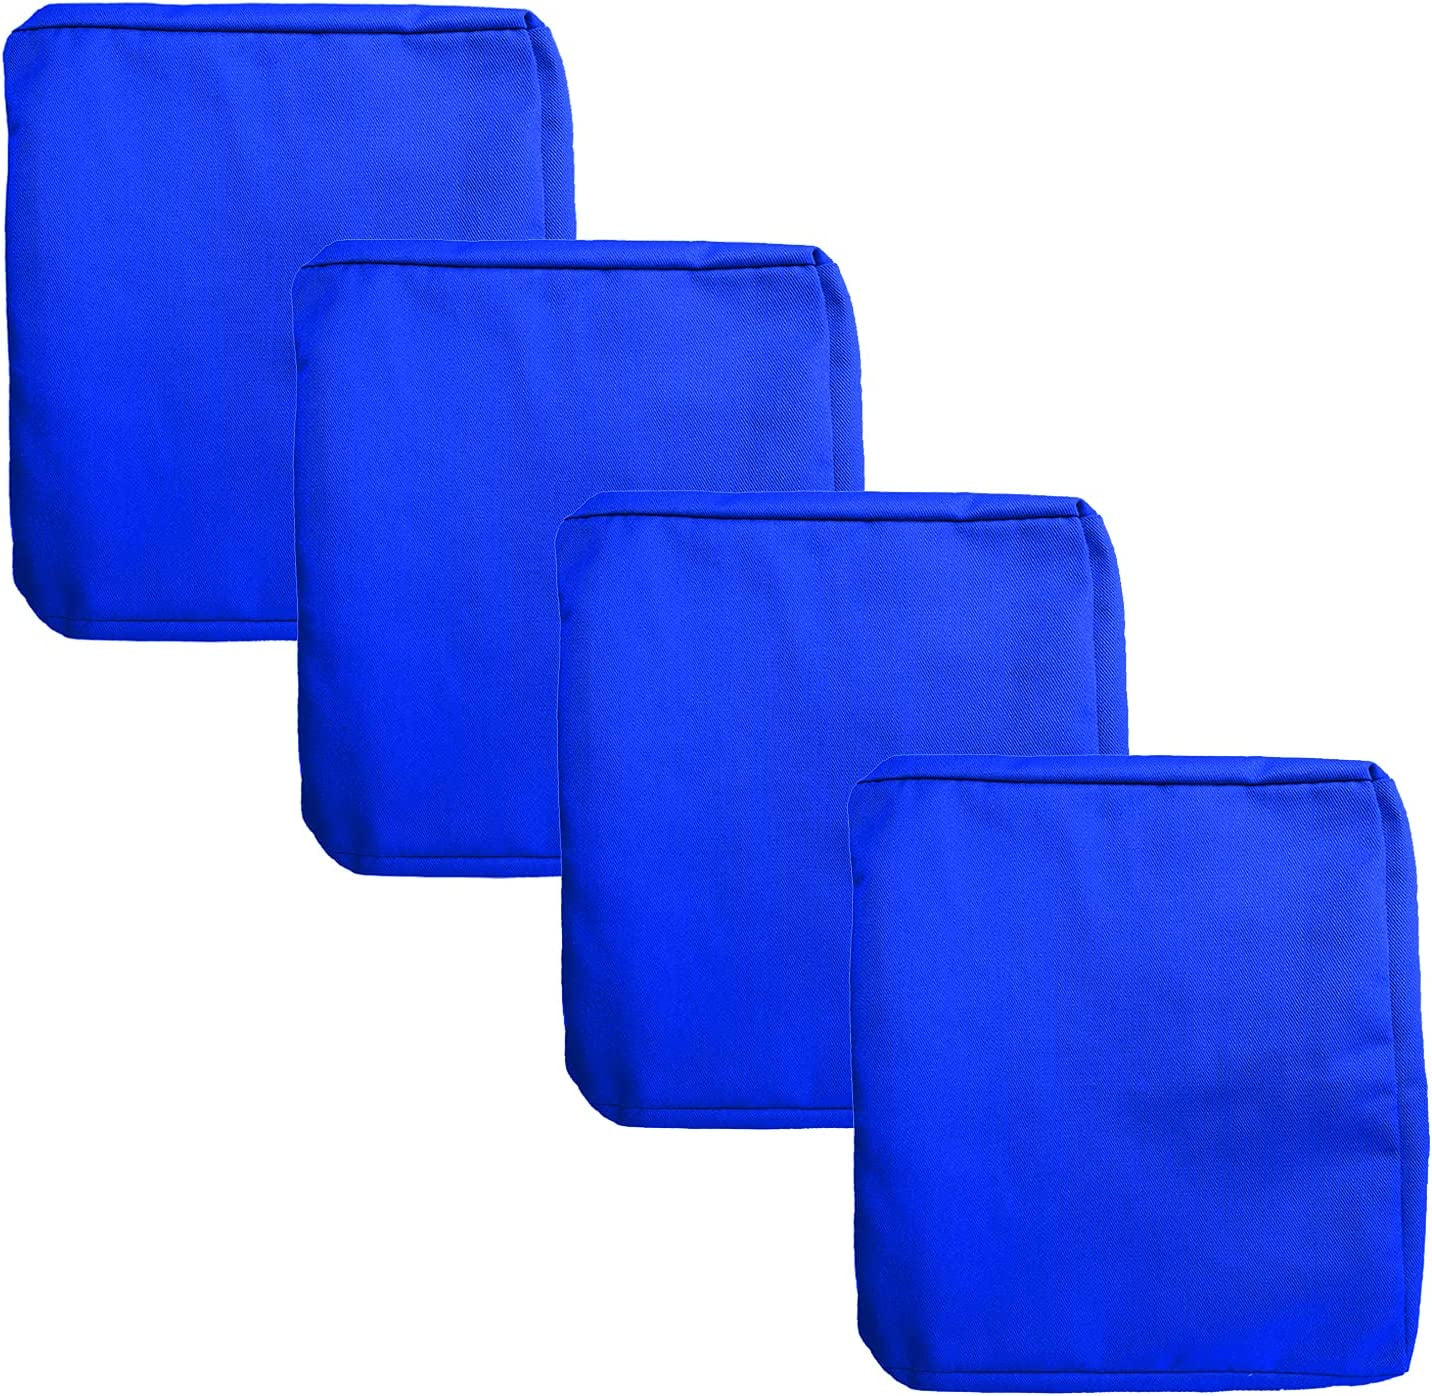 FLYMEI, FLYMEI Outdoor Cushion Cover Replacement, Patio Lovesest Cushion Covers Only, Water Resistant Patio Cushion Cover (18'' X 16'' X 4'' 4Pack, Royal Blue)